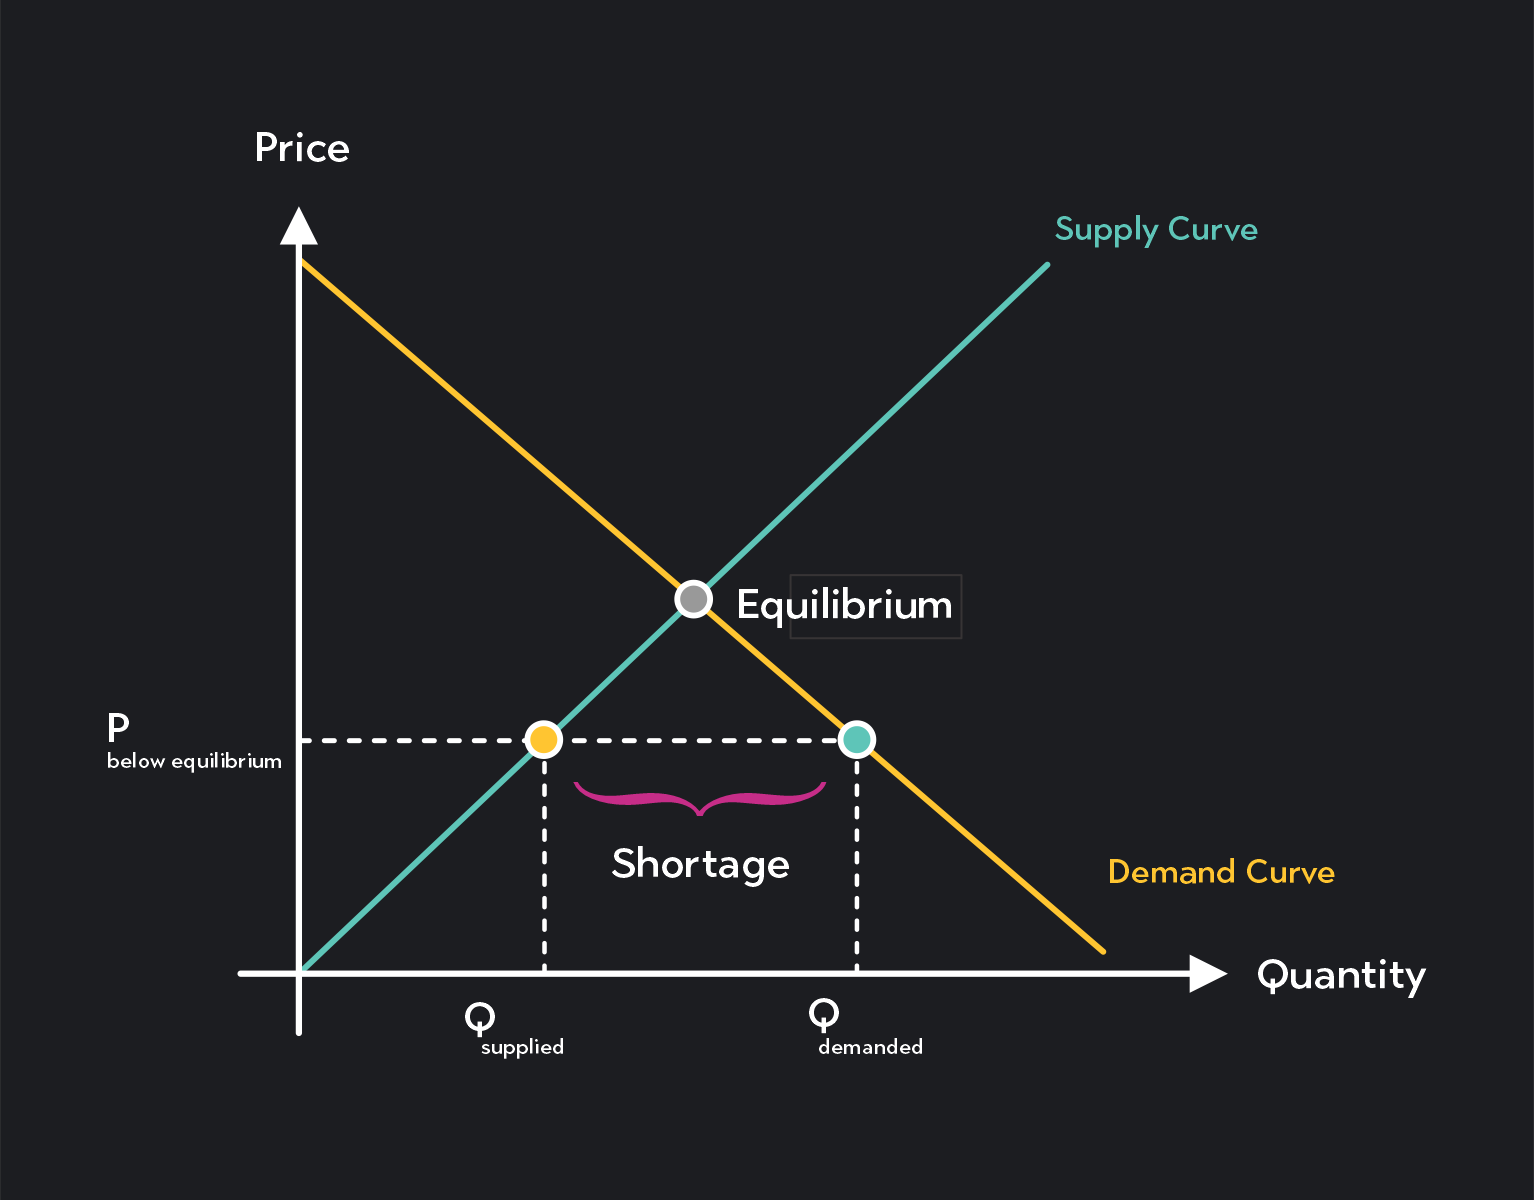 Graph showing that when the price is below equilibrium, there is a market shortage